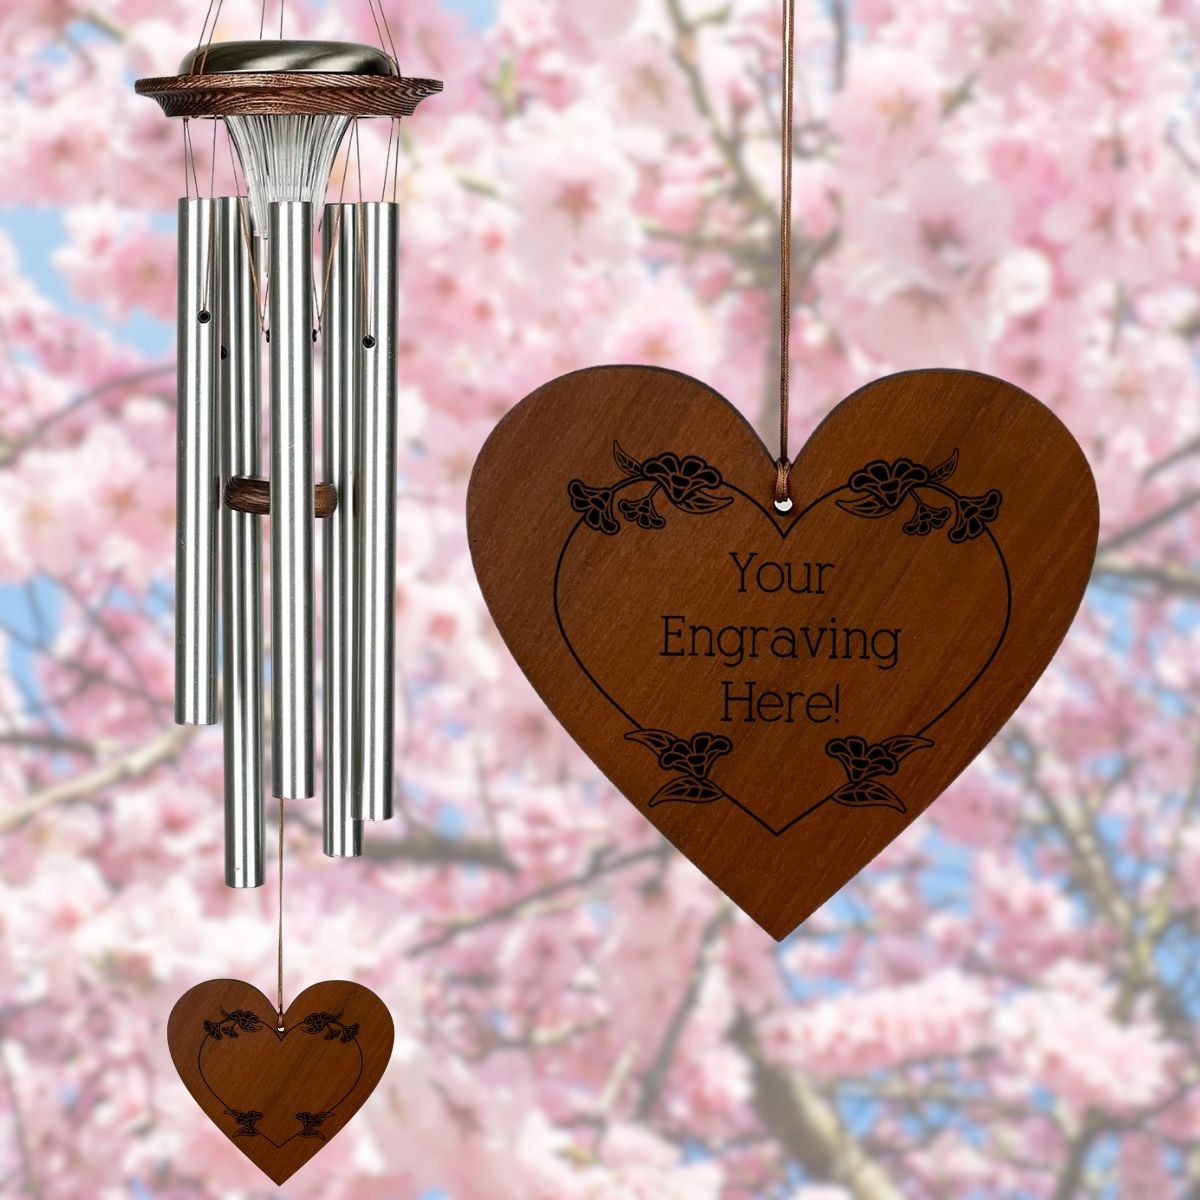 Moonlight Solar Chime 29 Inch Wind Chime - Engravable Blossom Heart Sail - Silver